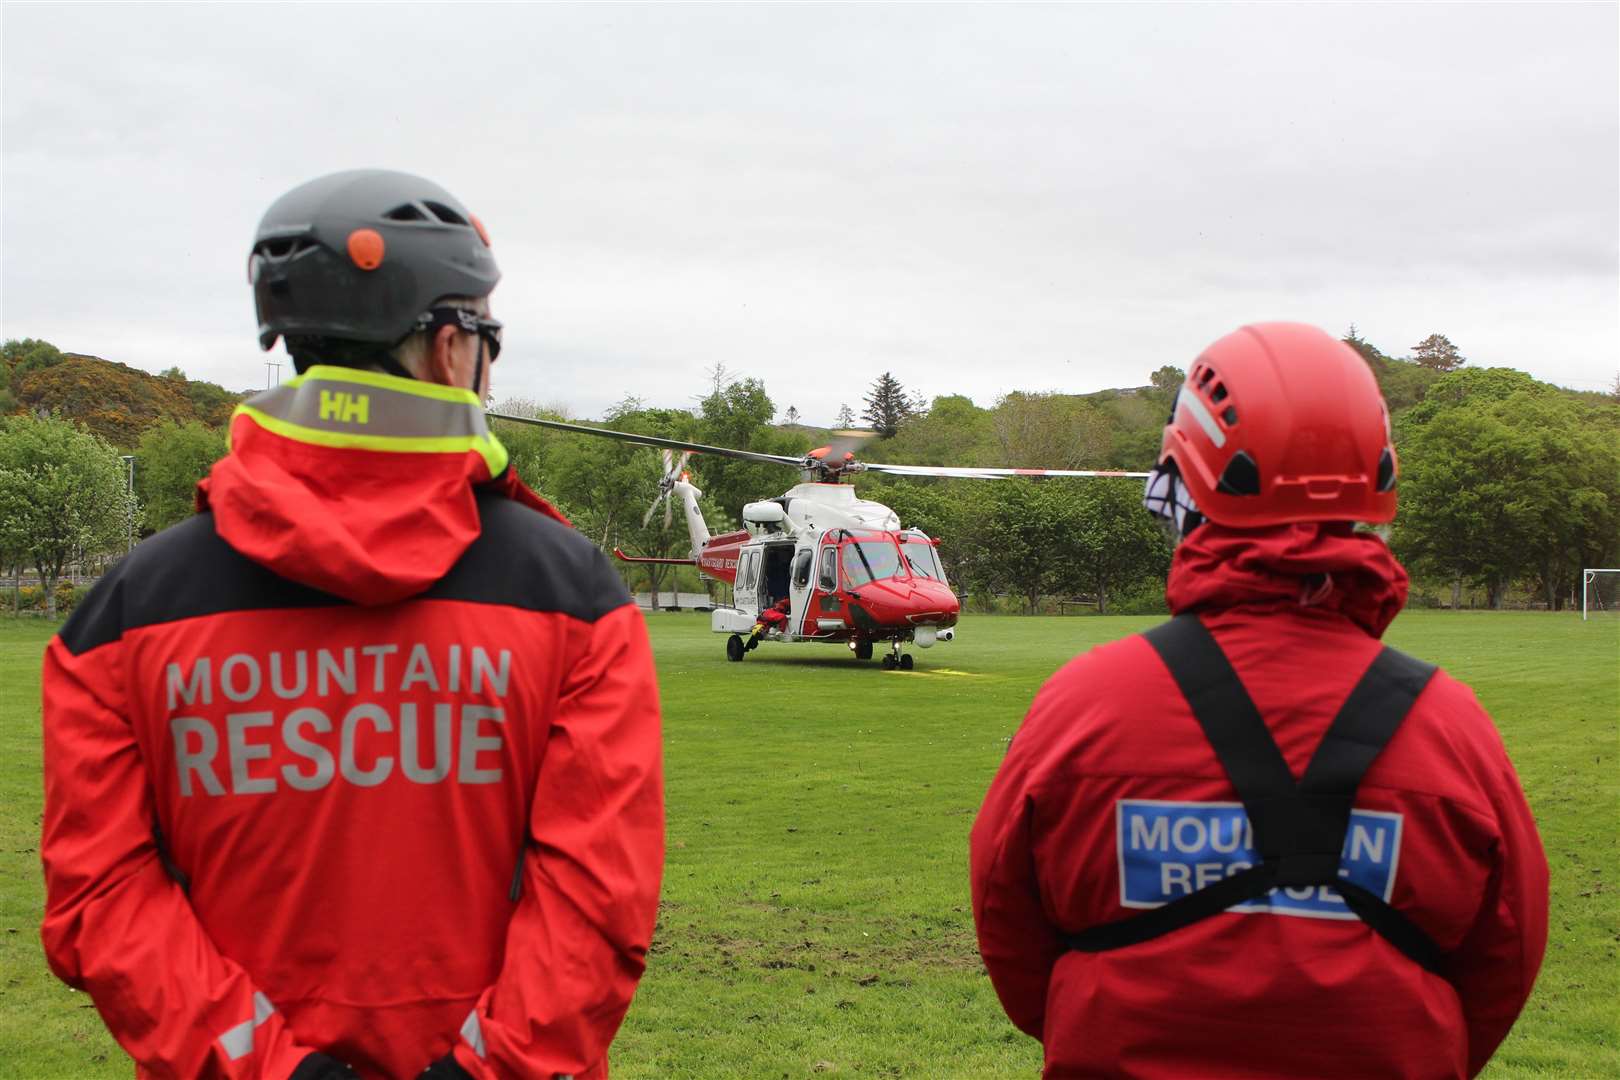 The HM Coastguard helicopter arrives at Lochinver from its base at Dalcross Airport, Inverness.